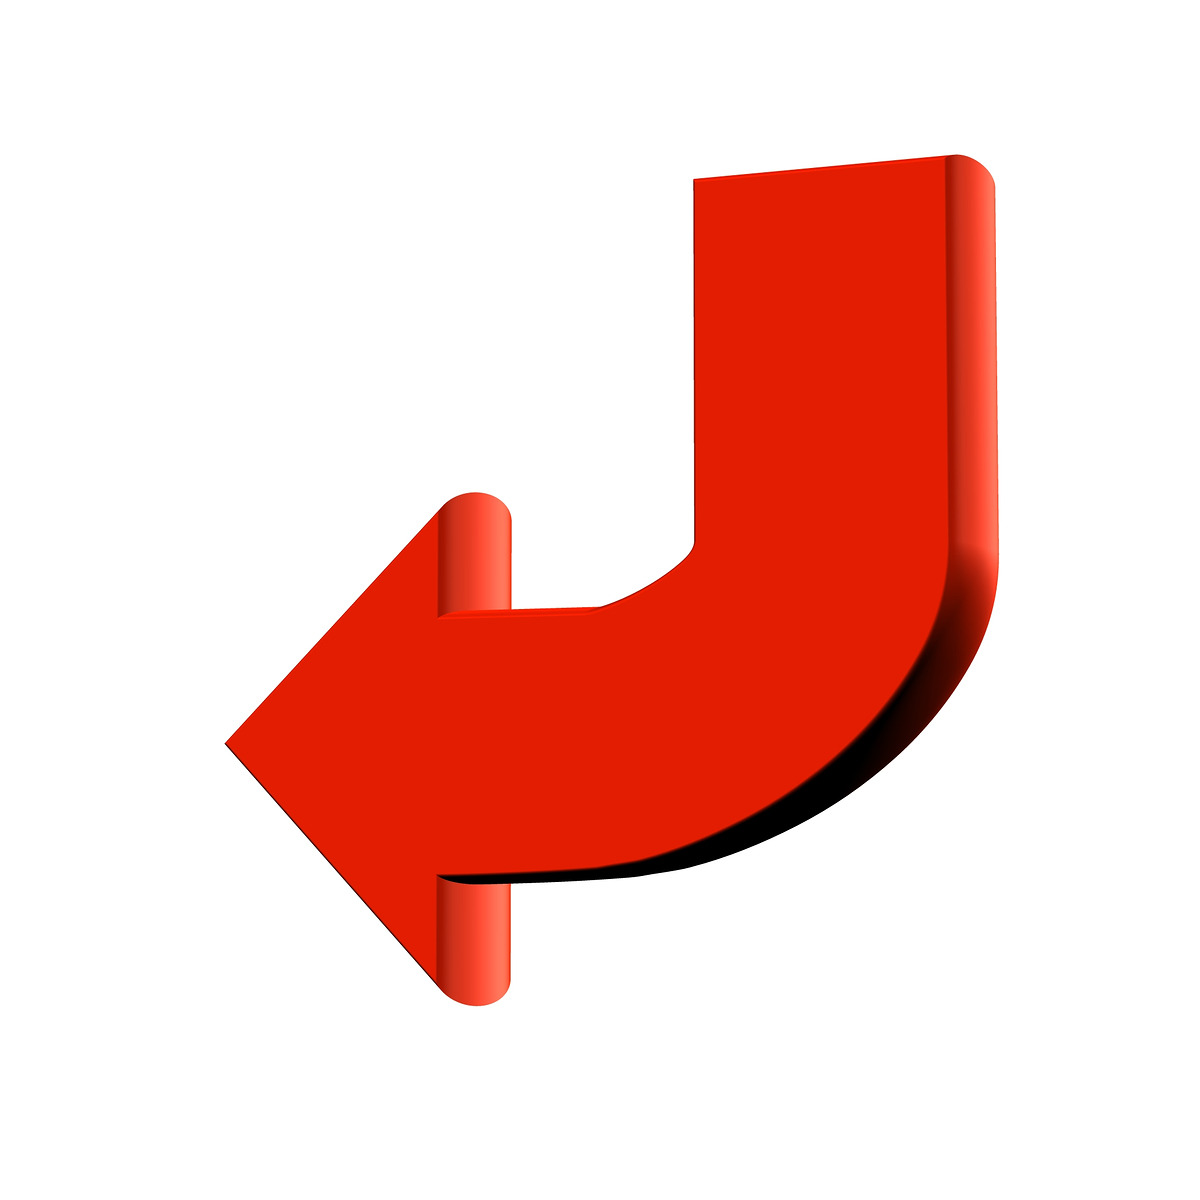 Images For > Red Curved Arrow Png